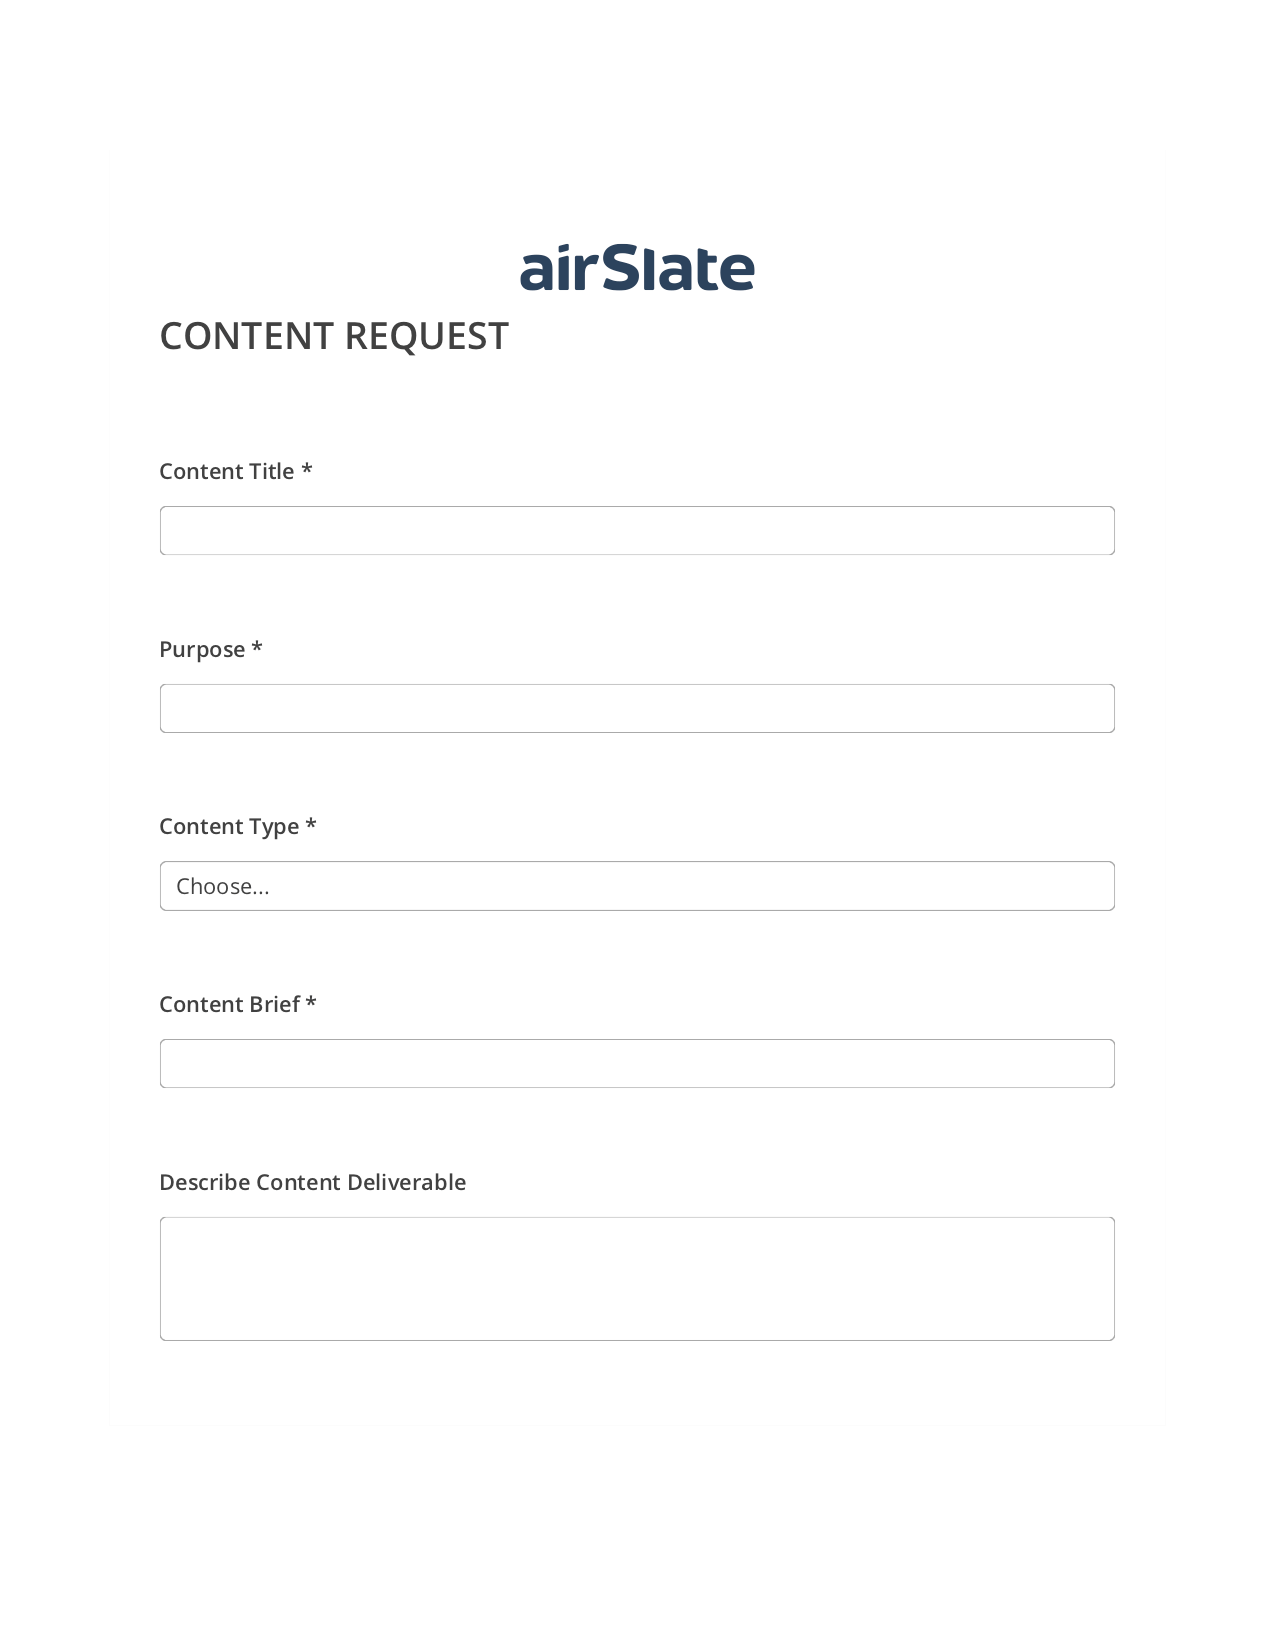 Content Request Flow Pre-fill from Smartsheet Bot